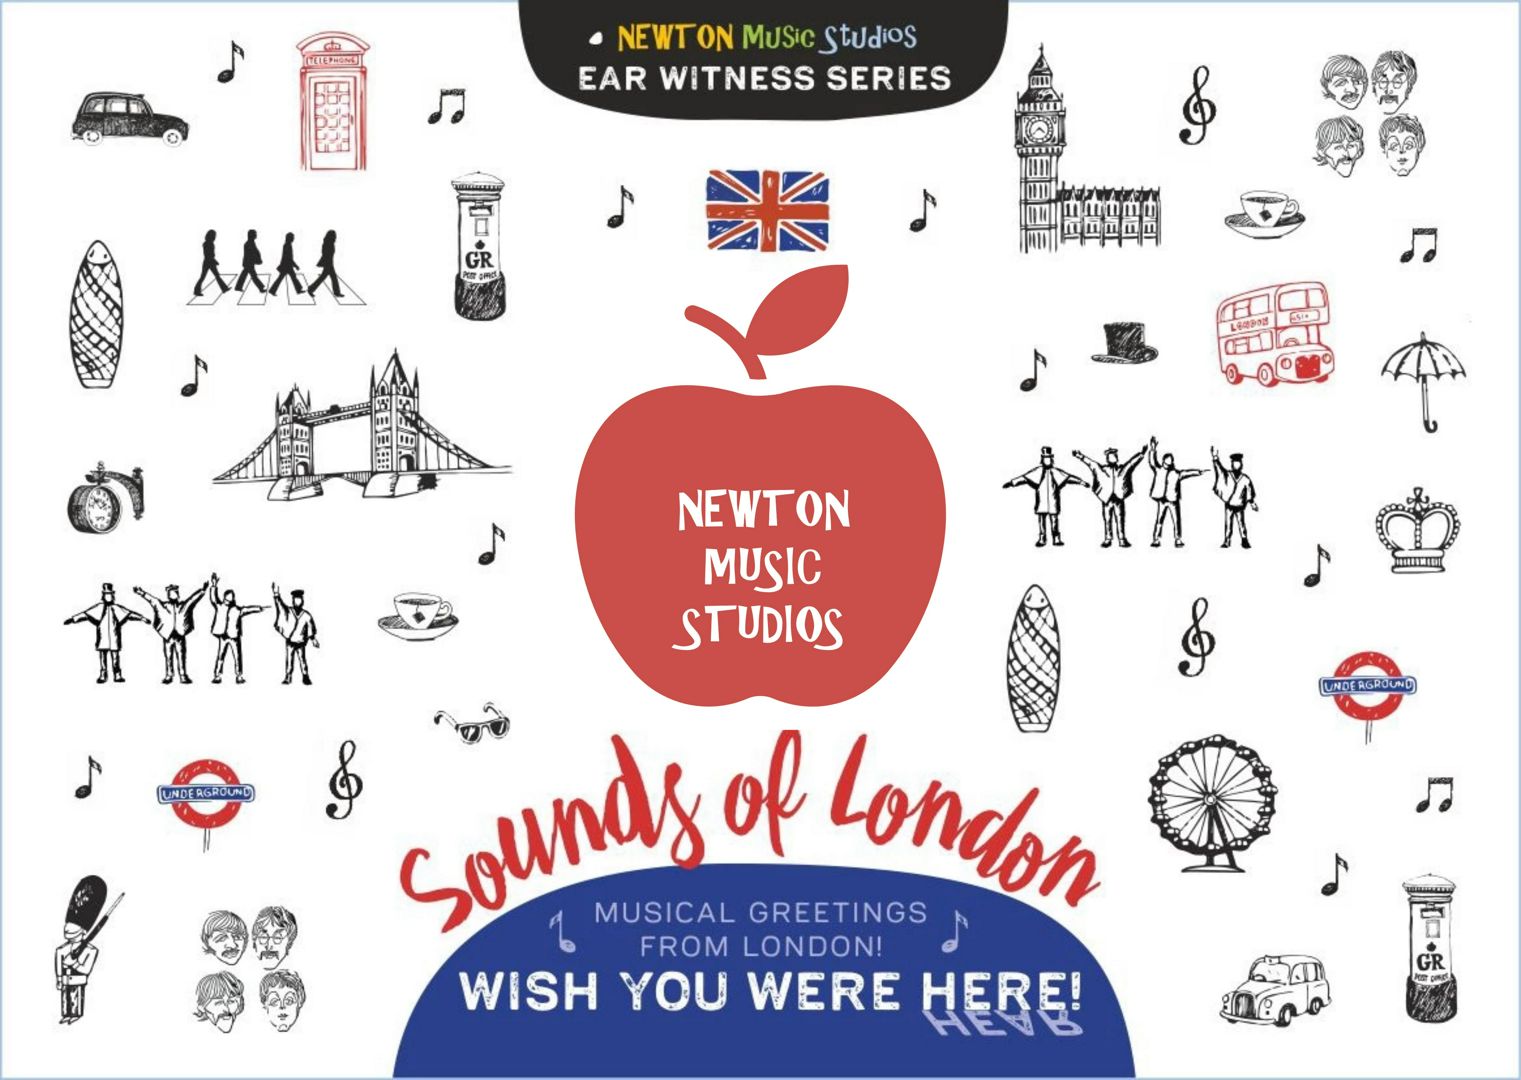 "The Sounds of London" musical album